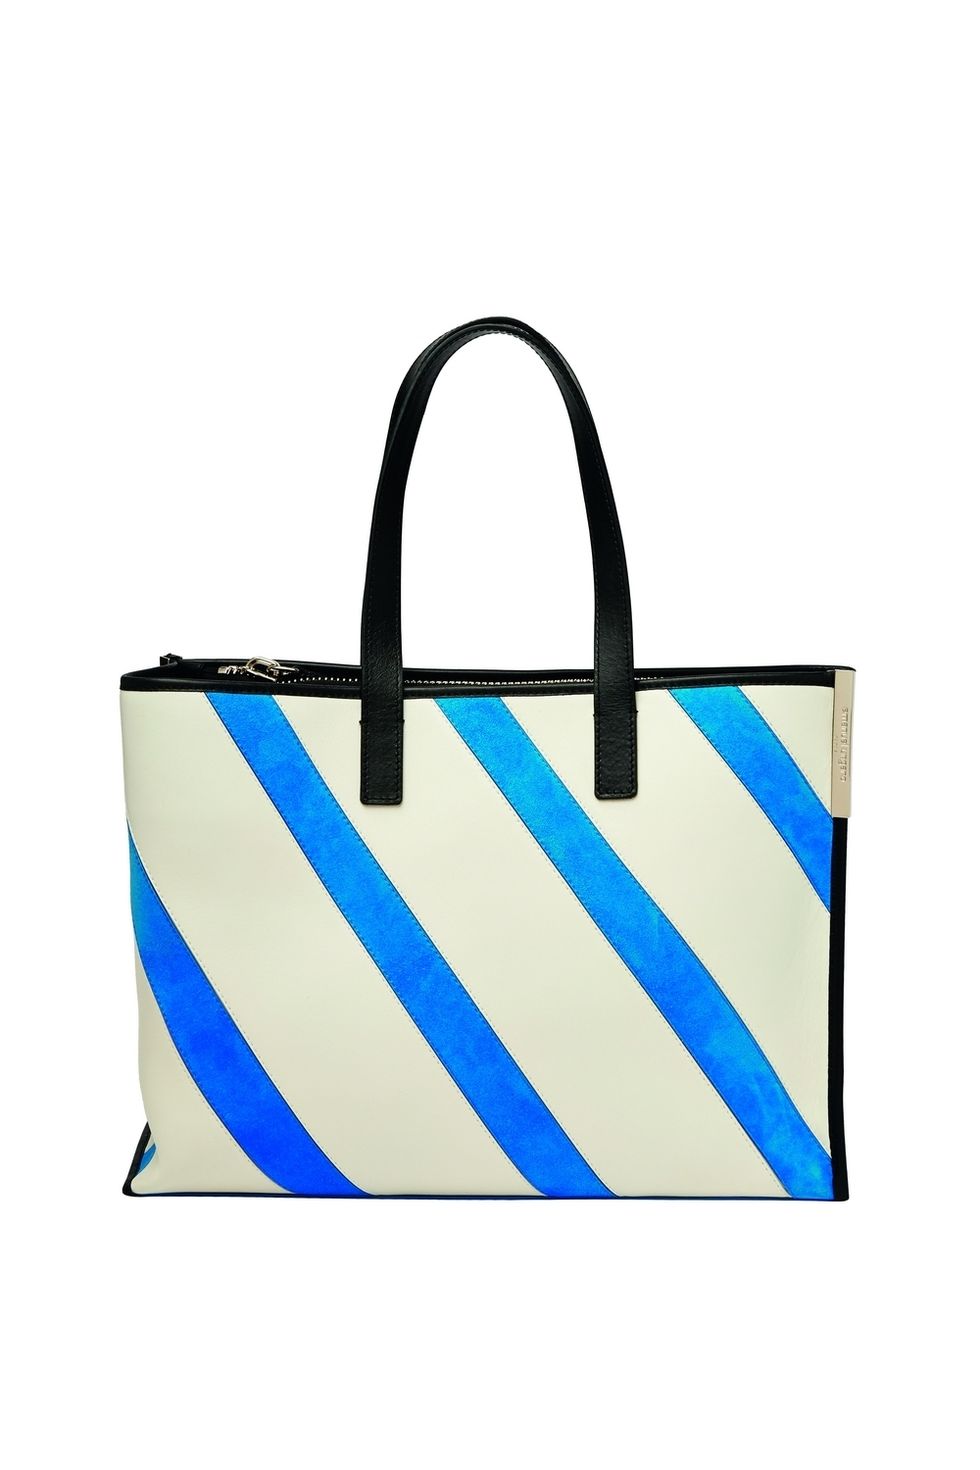 Bag, Style, Electric blue, Tote bag, Luggage and bags, Azure, Shopping bag, Shoulder bag, Aqua, Turquoise, 